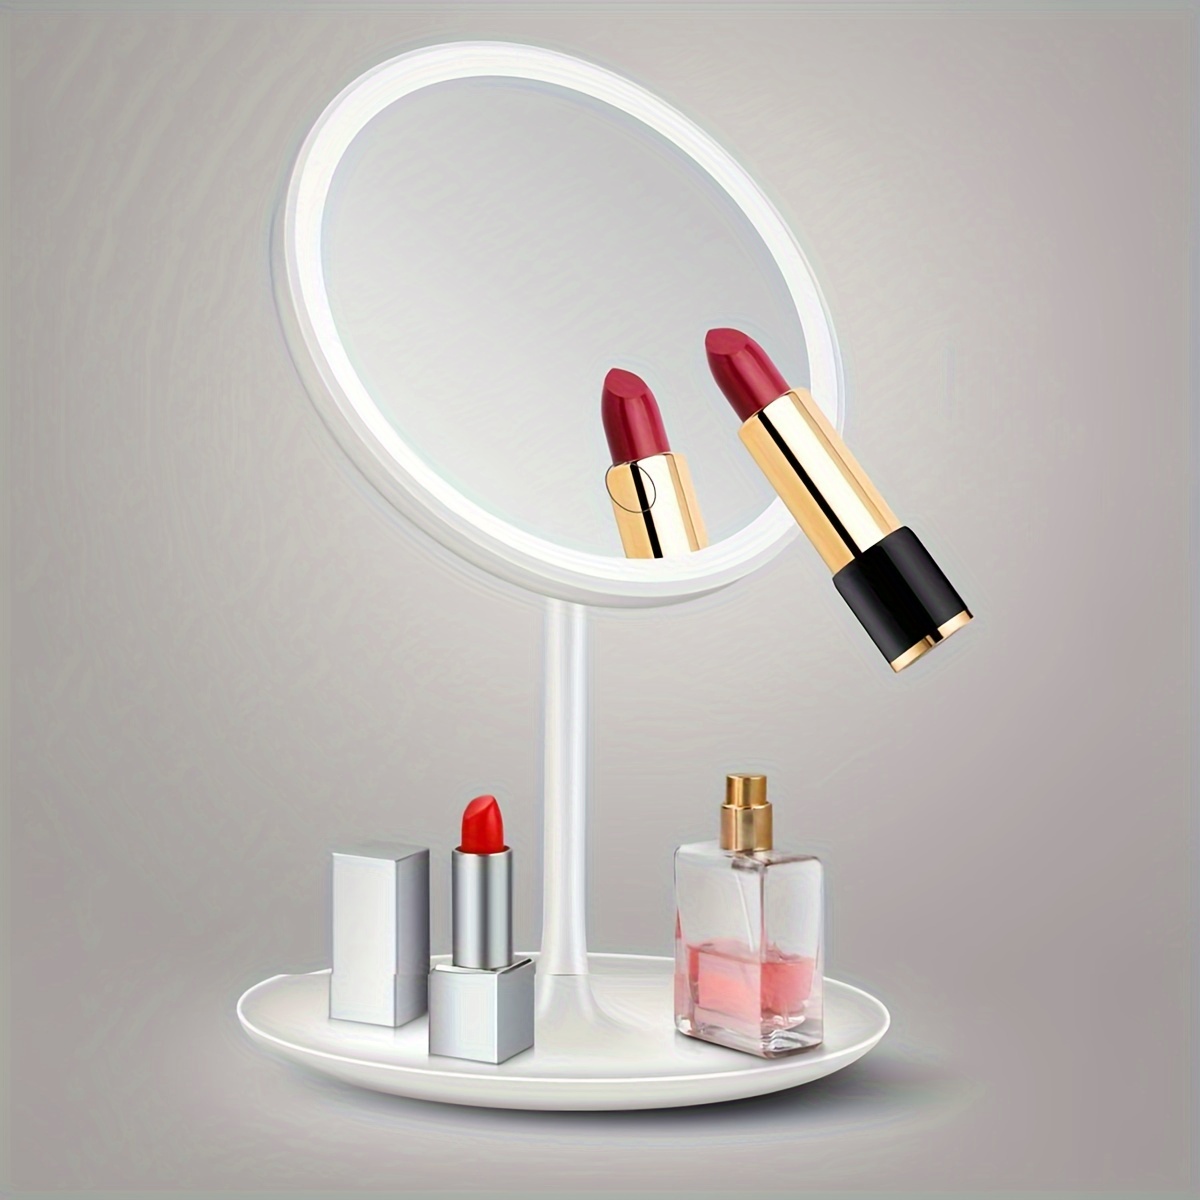 

Led Tabletop Vanity Makeup Mirror With Stand Lighted Round Beauty Mirror Bathroom Bedroom Dressing Mirror For Closed Skincare & Detailed Makeup